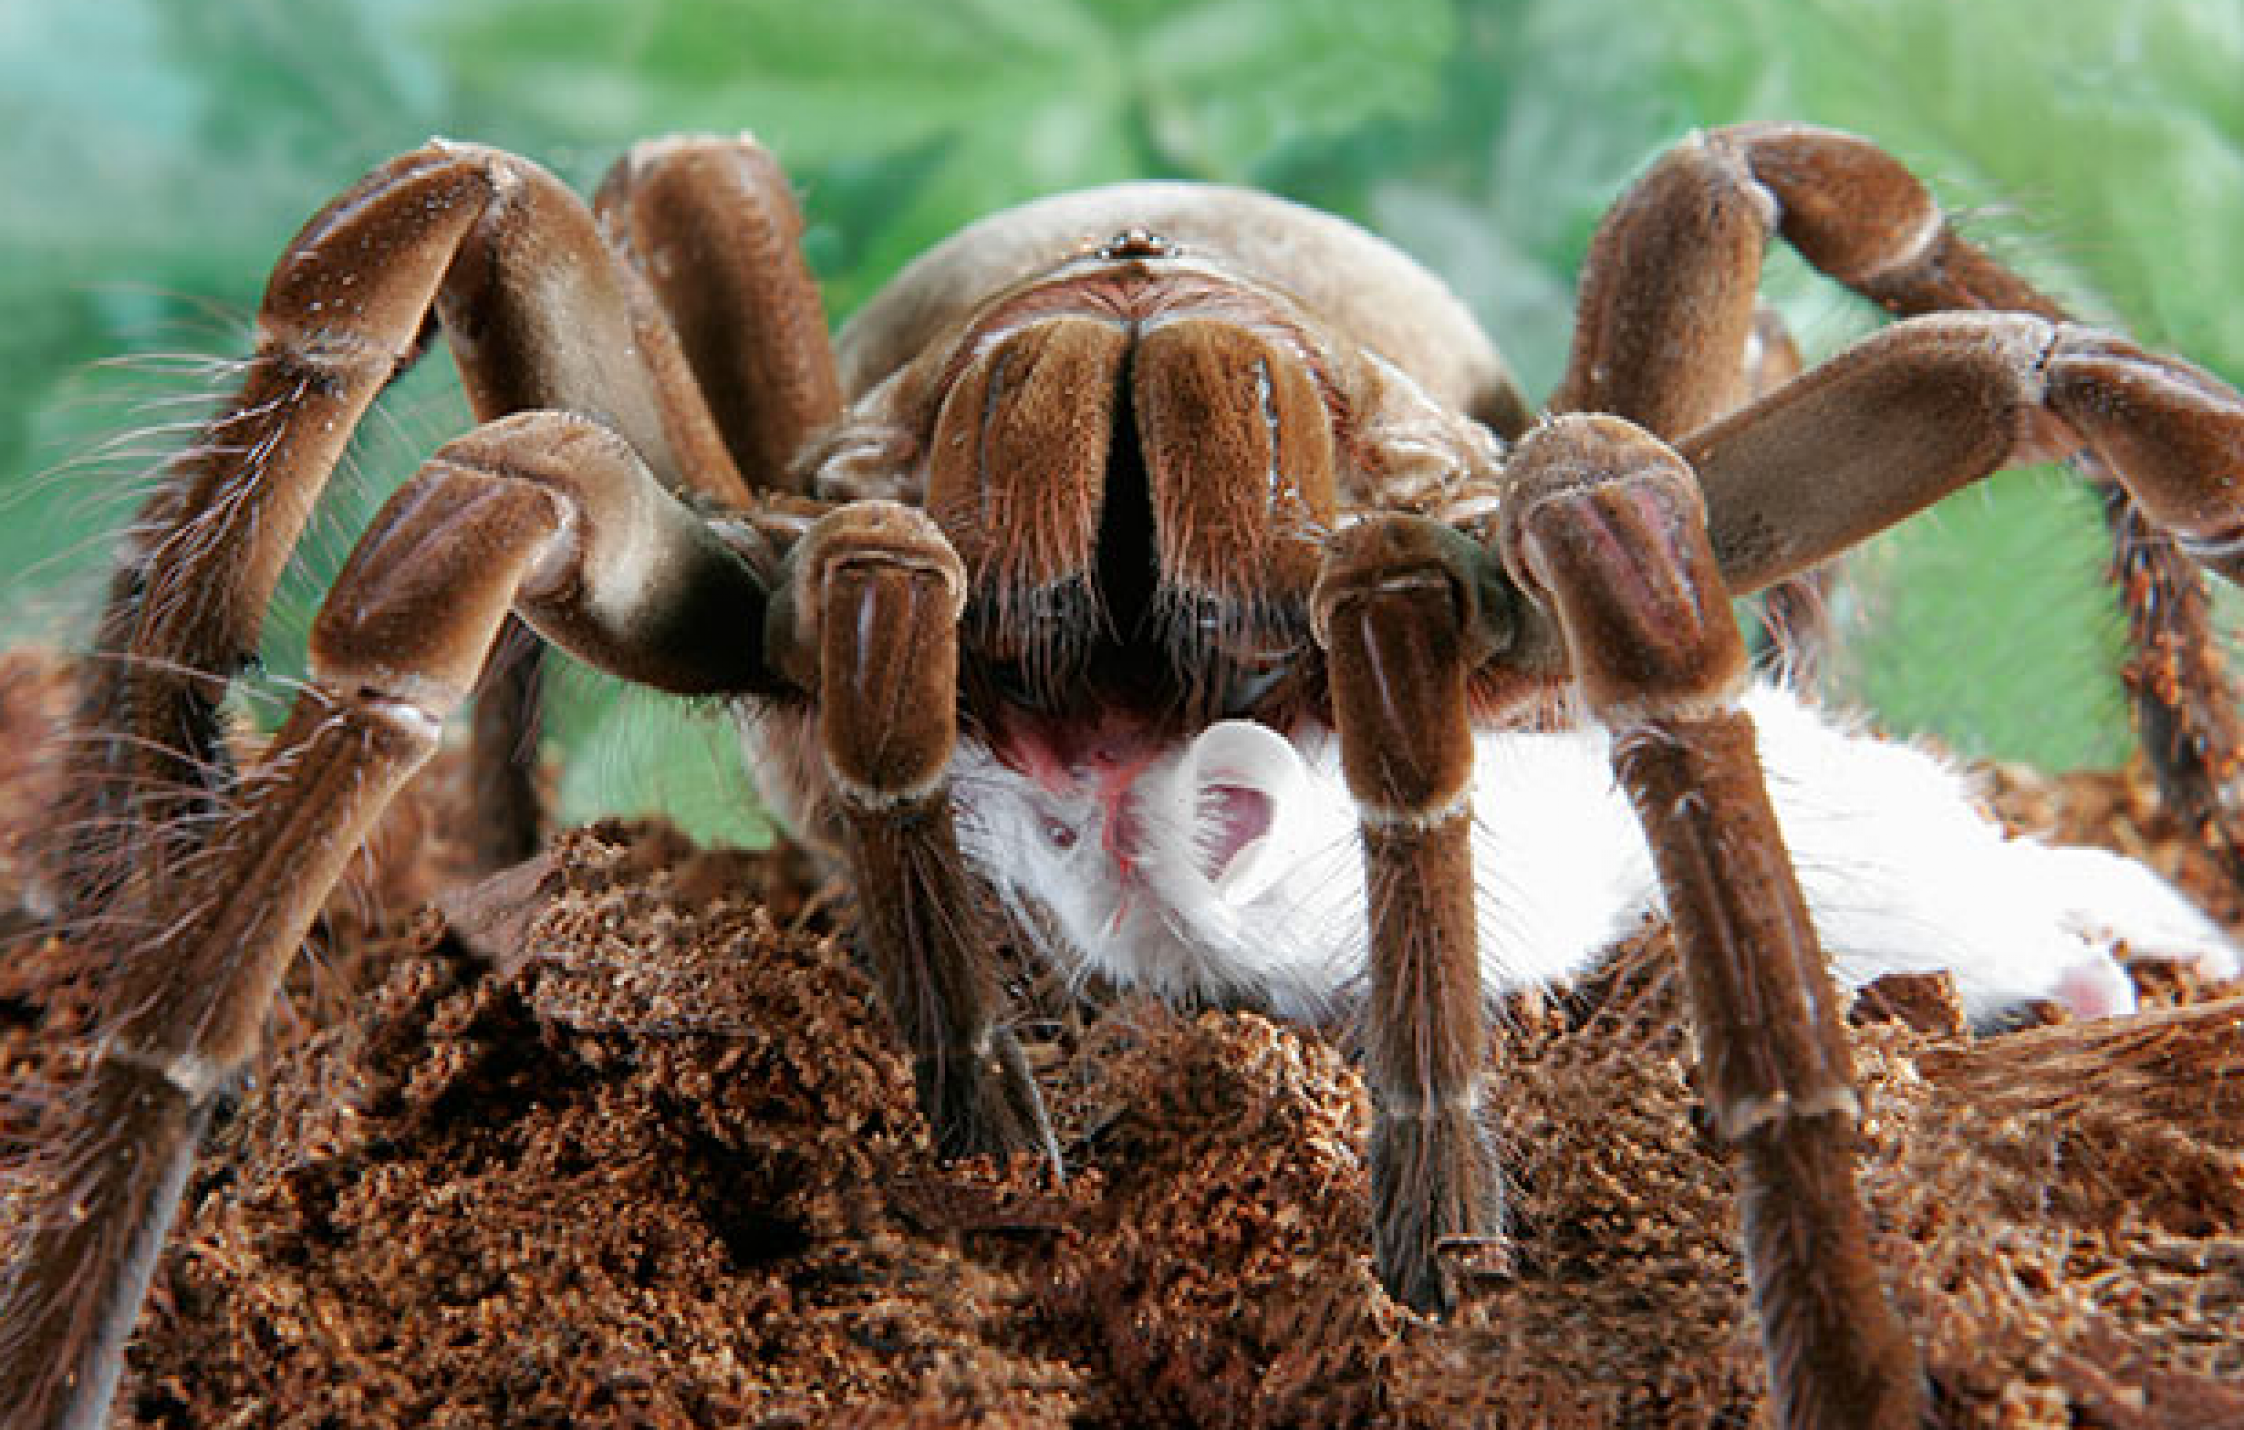 World's Largest Spider is From South America, and It's the Worst